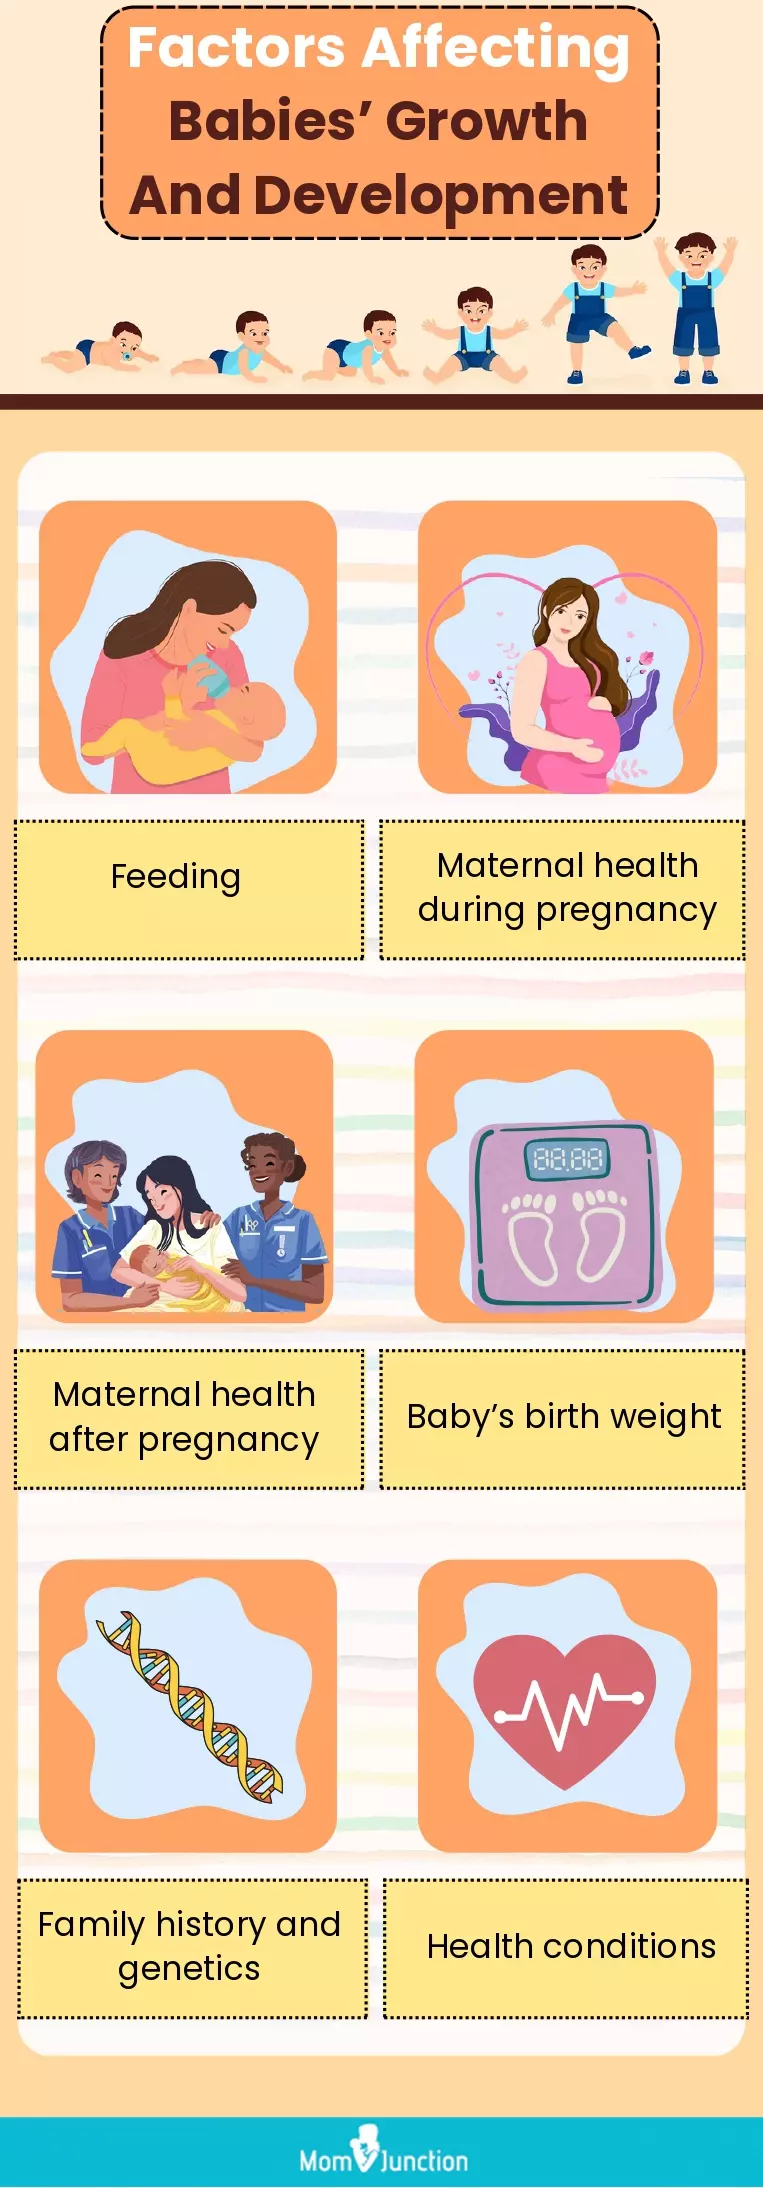 factors affecting babies’ growth and development (infographic)